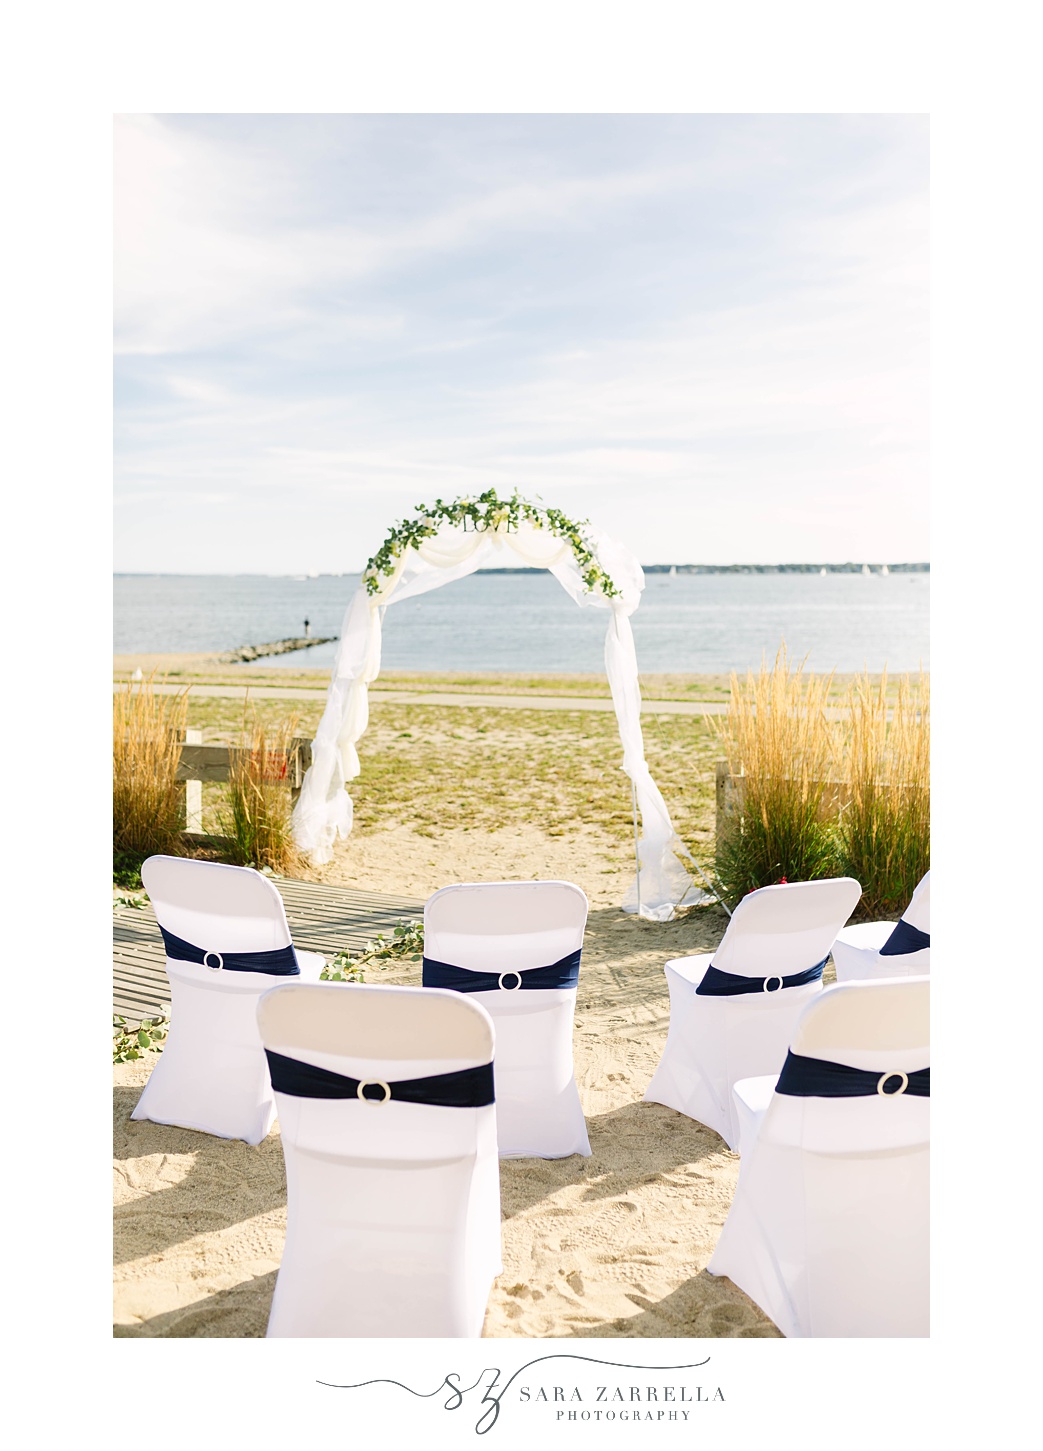 beachfront wedding ceremony with arbor and seats with navy accents